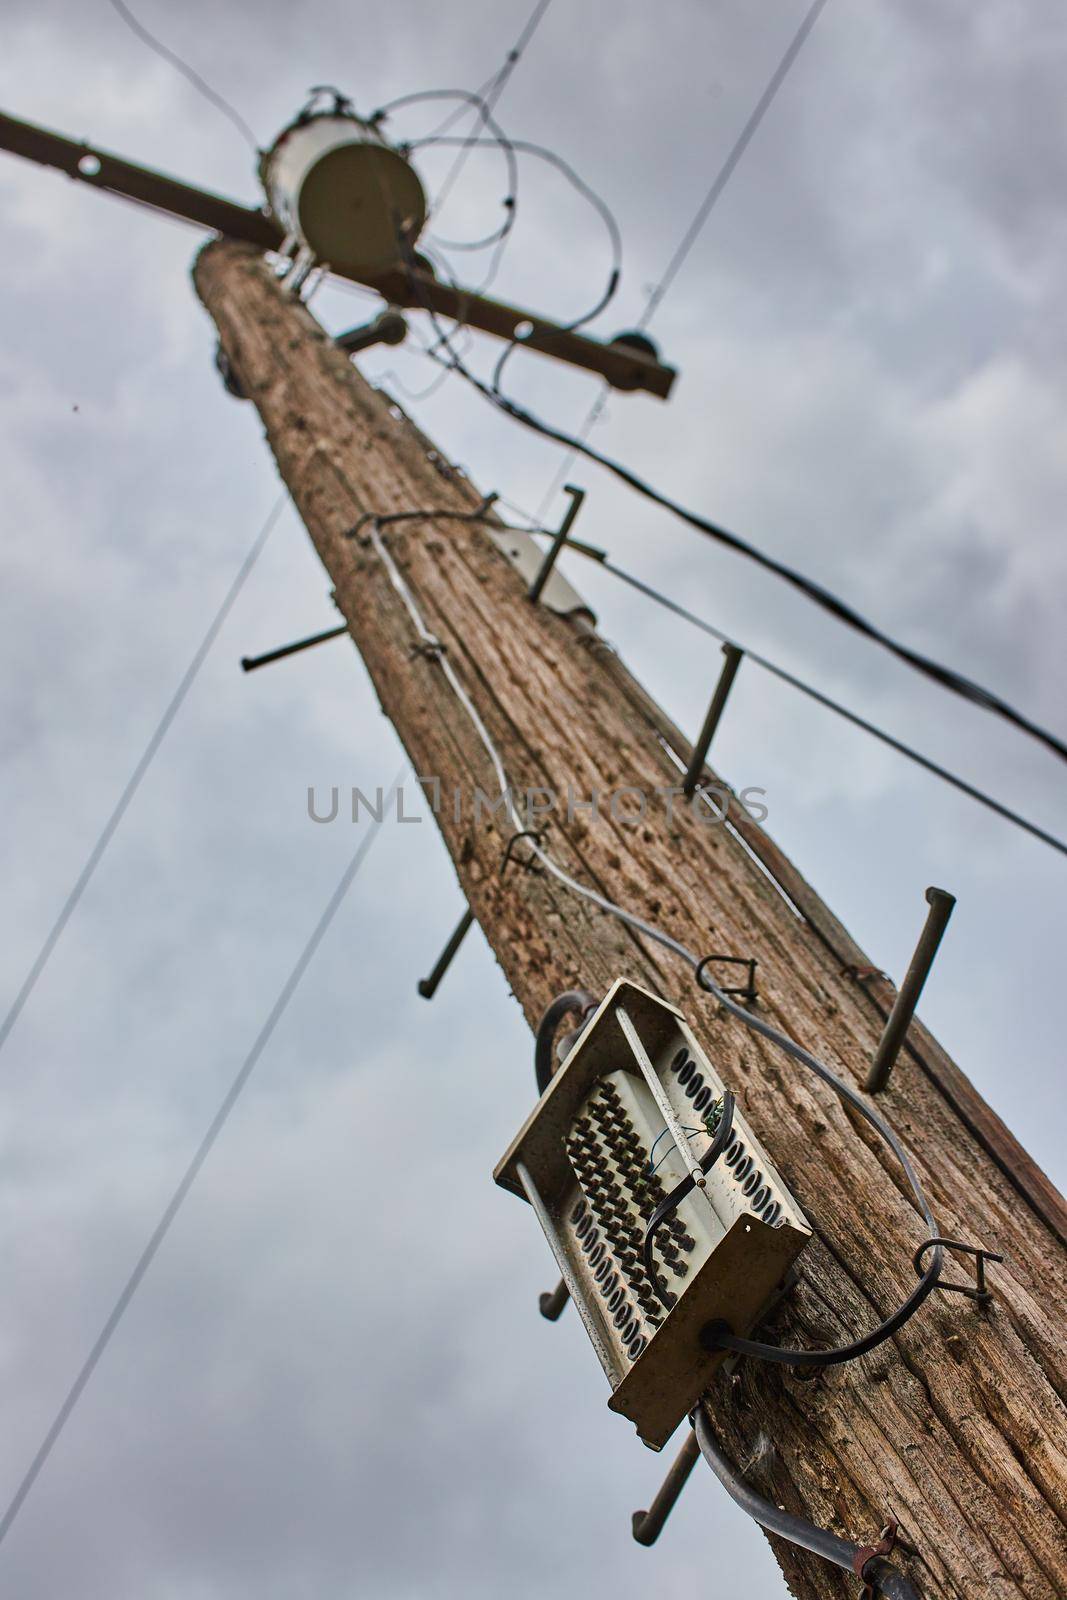 Telephone pole looking up detail on cloudy day for communication and power by njproductions